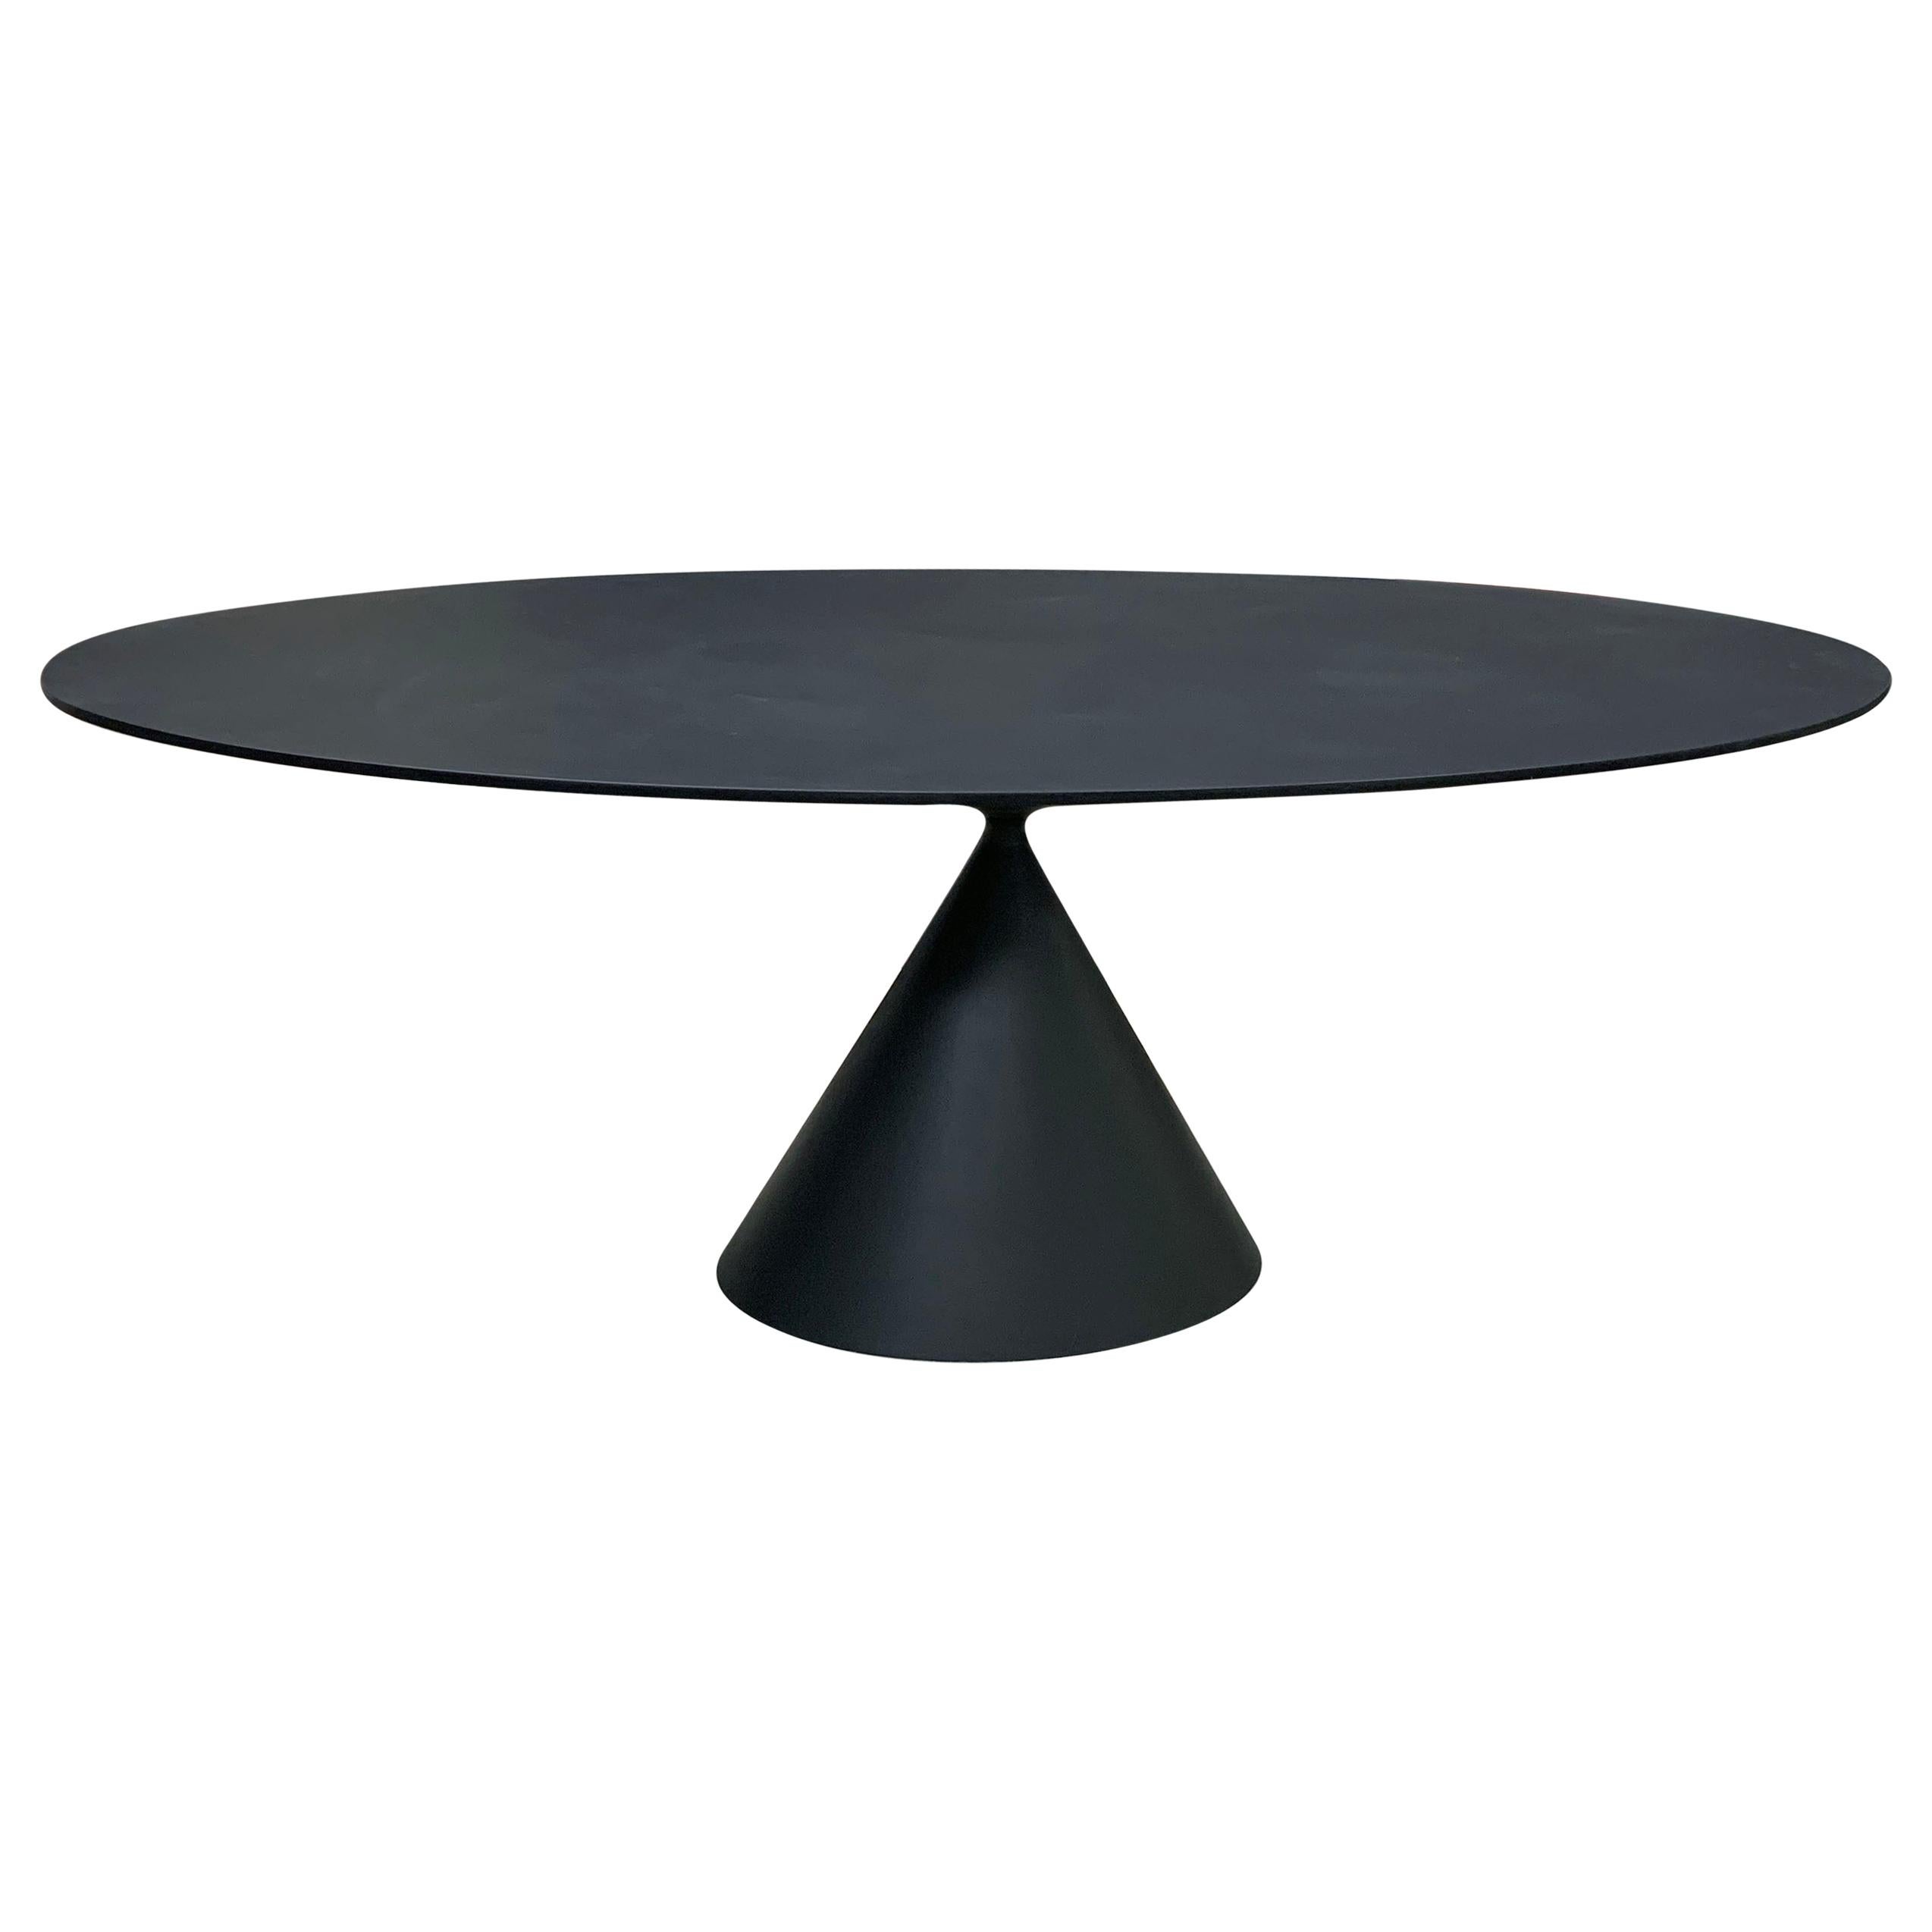 NEW Desalto INDOOR OR OUTDOOR Round Black Clay Table by Marc Krusin in STOCK For Sale